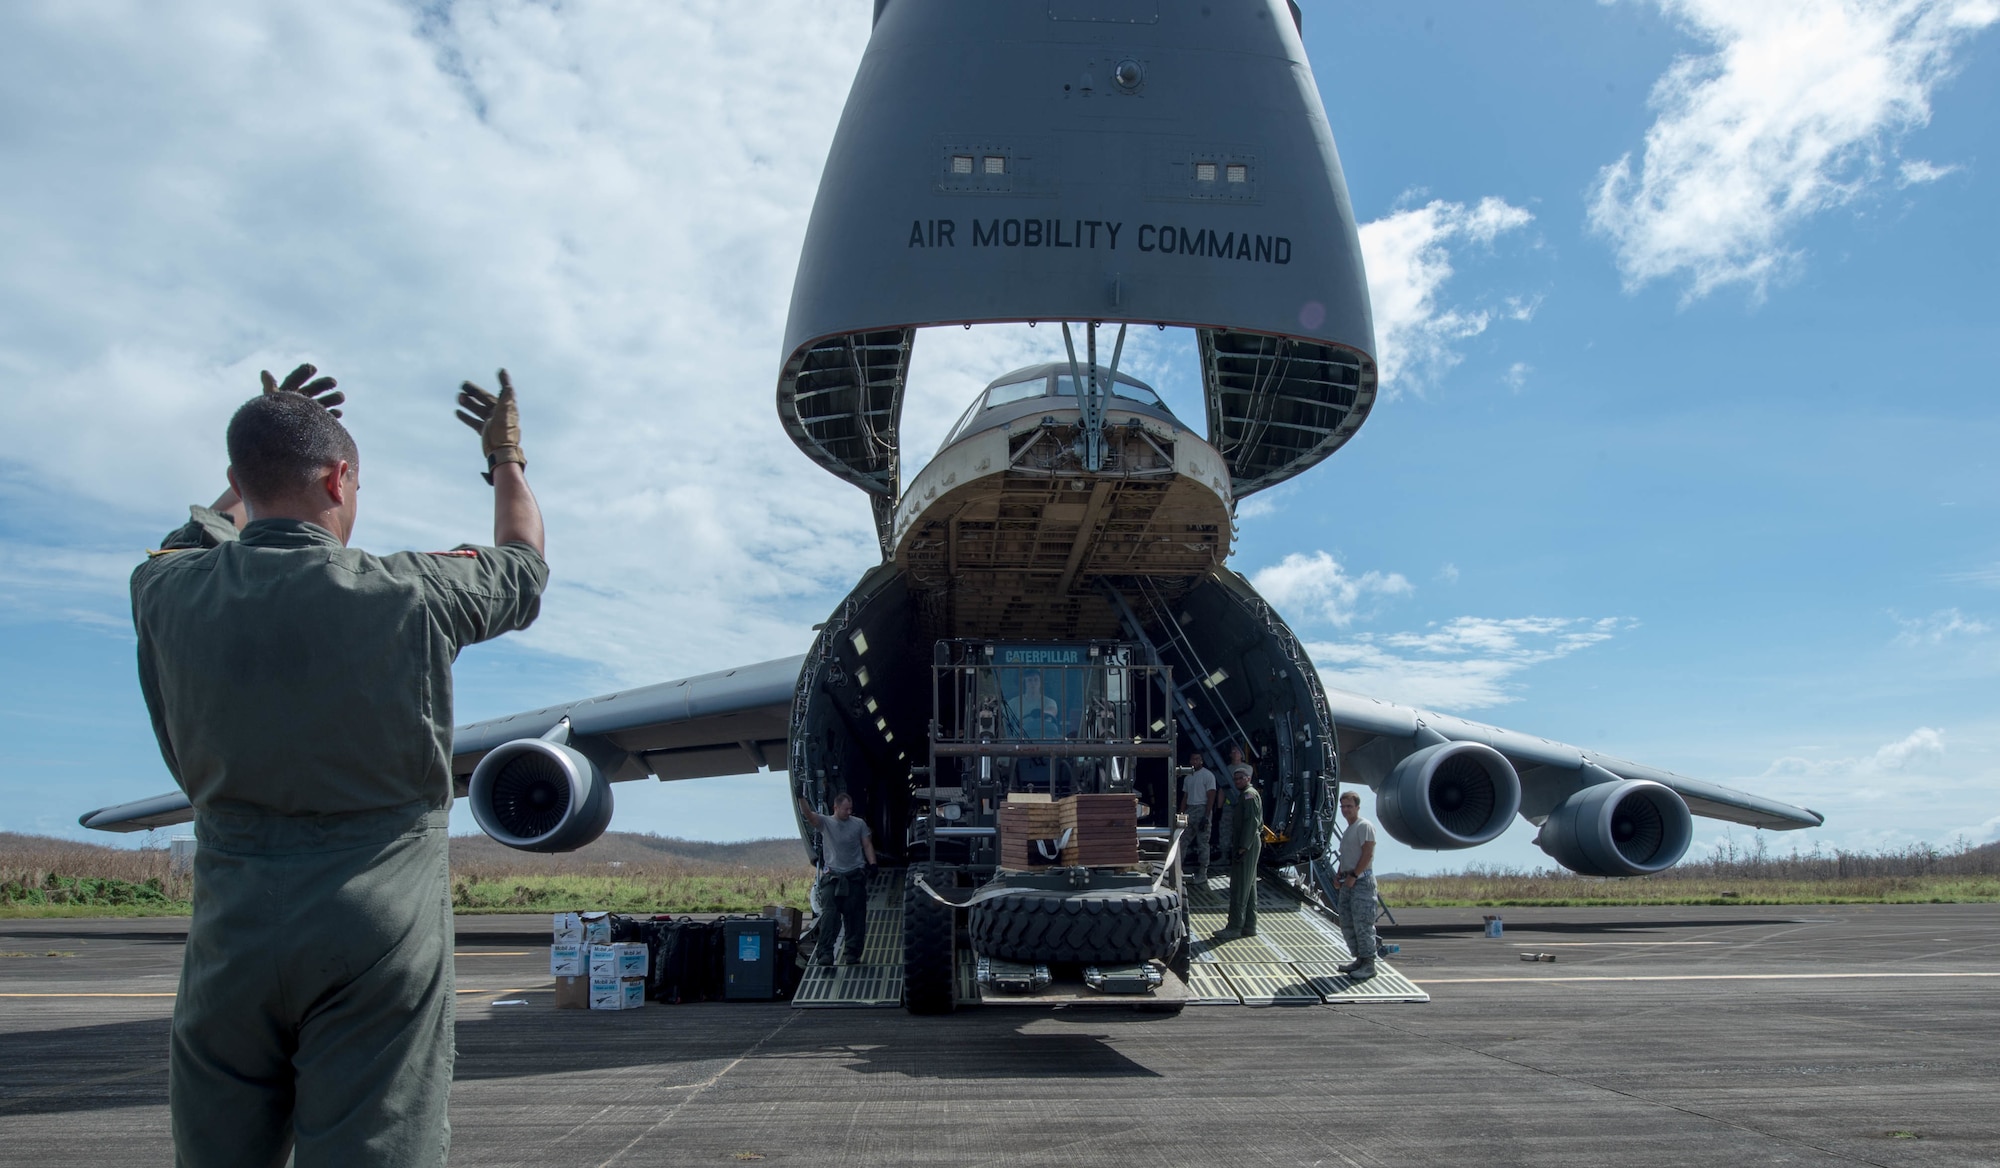 The 821st Contingency Response Group equipment is offloaded from a C-5M Super Galaxy from Travis Air Force Base Calif., at Roosevelt Roads, Puerto Rico, Sept. 25, 2017. A 70 member contingency response element from the 821st Contingency Response Group stationed at Travis Air Force Base, Calif., deployed to Puerto Rico in support of Hurricane Maria relief efforts. (U.S. Air Force photo by Staff Sgt. Robert Hicks)